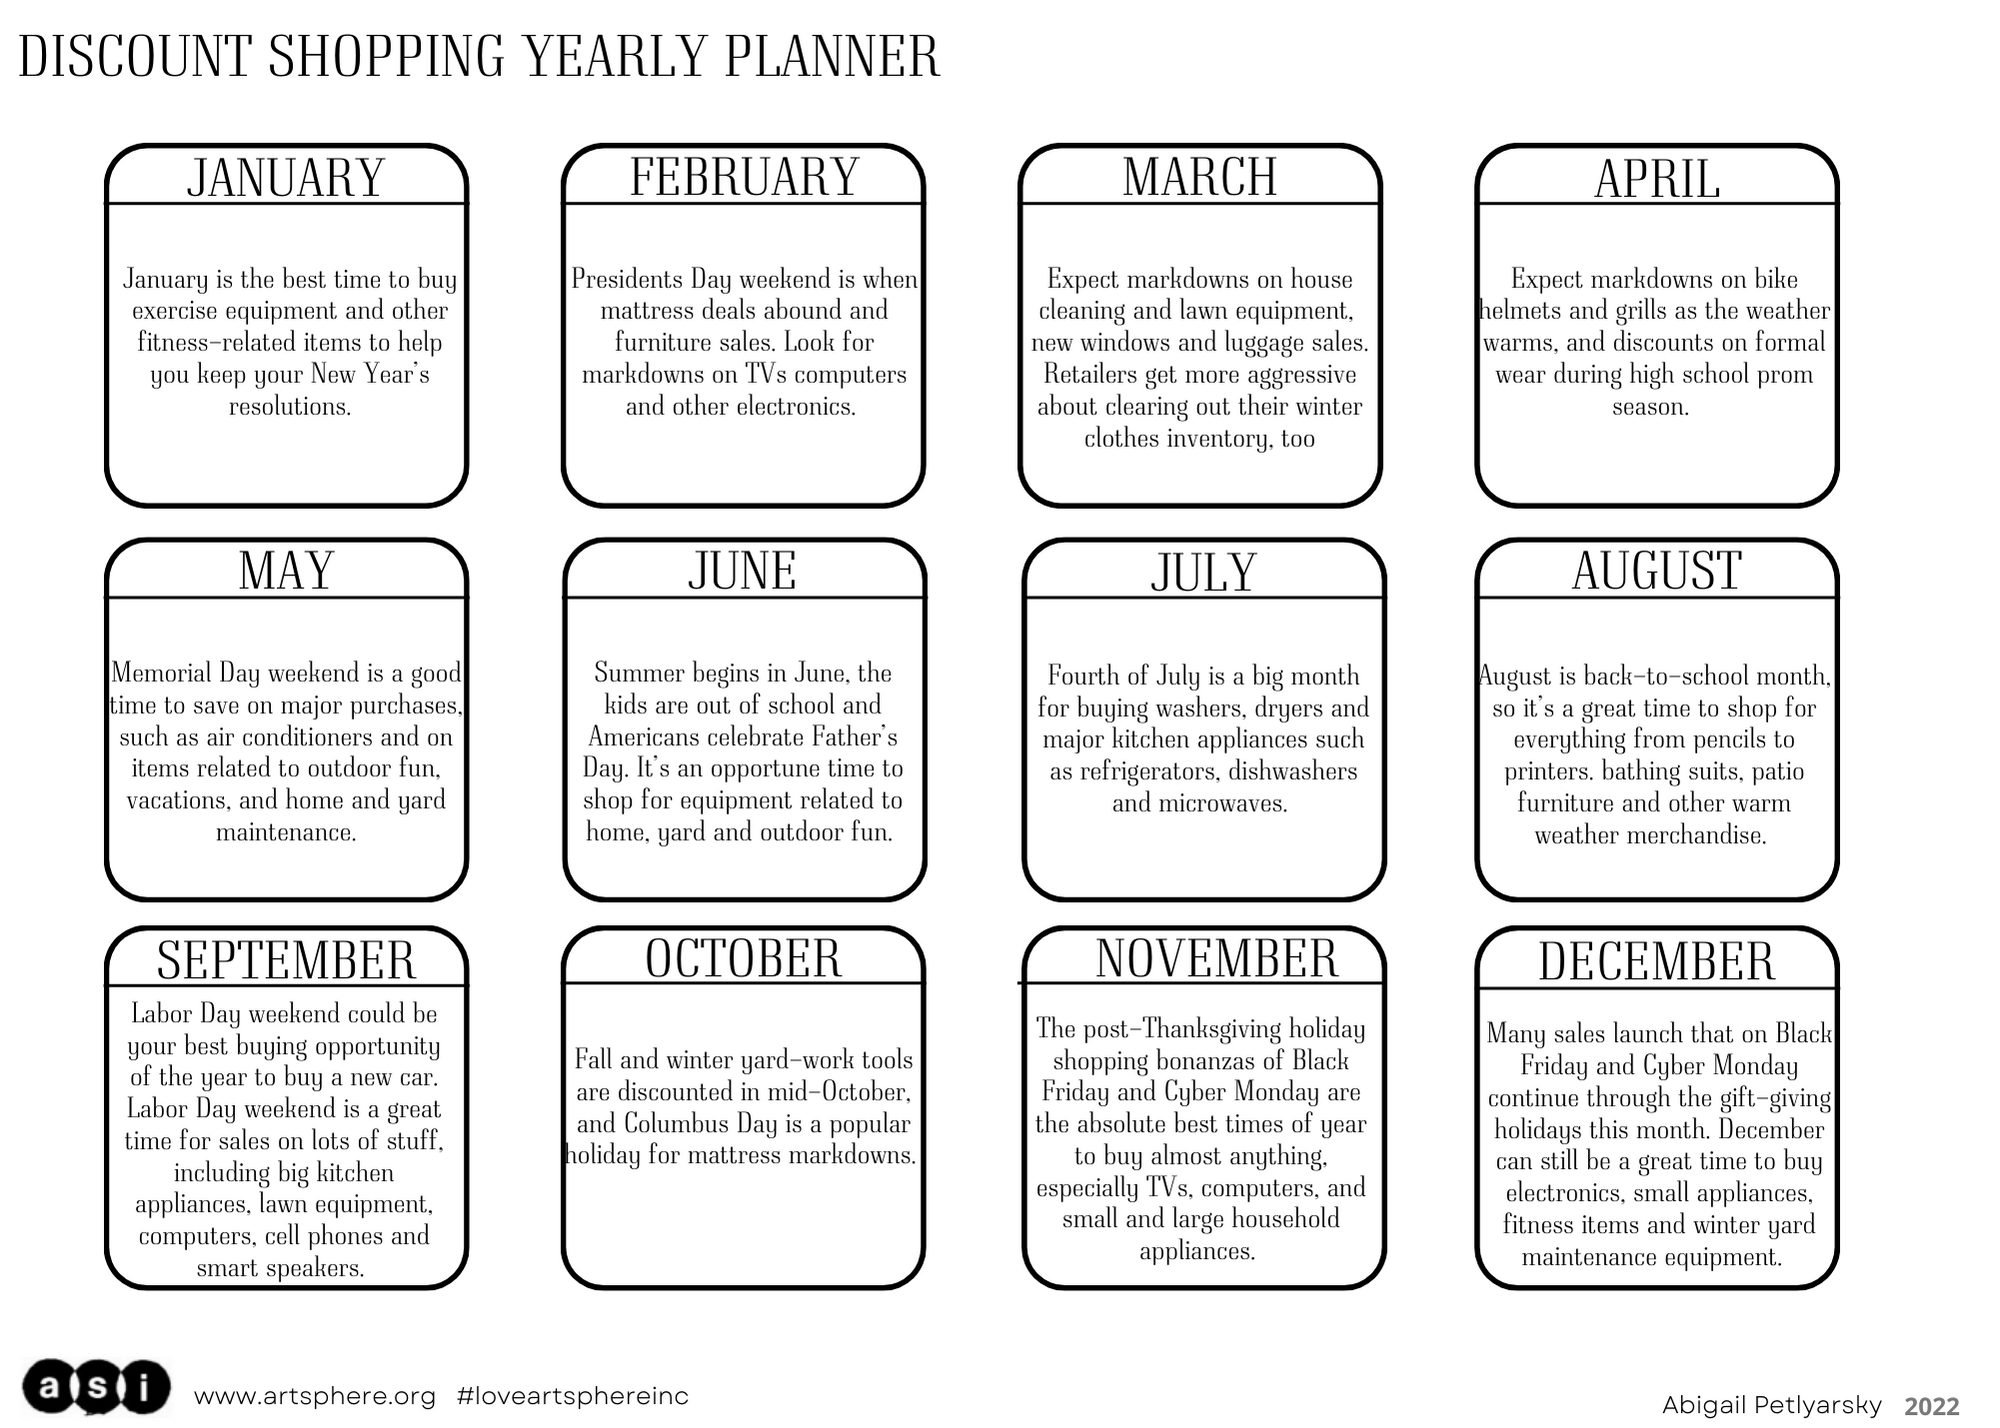 DISCOUNT SHOPPING YEARLY PLANNER Art Sphere Inc.